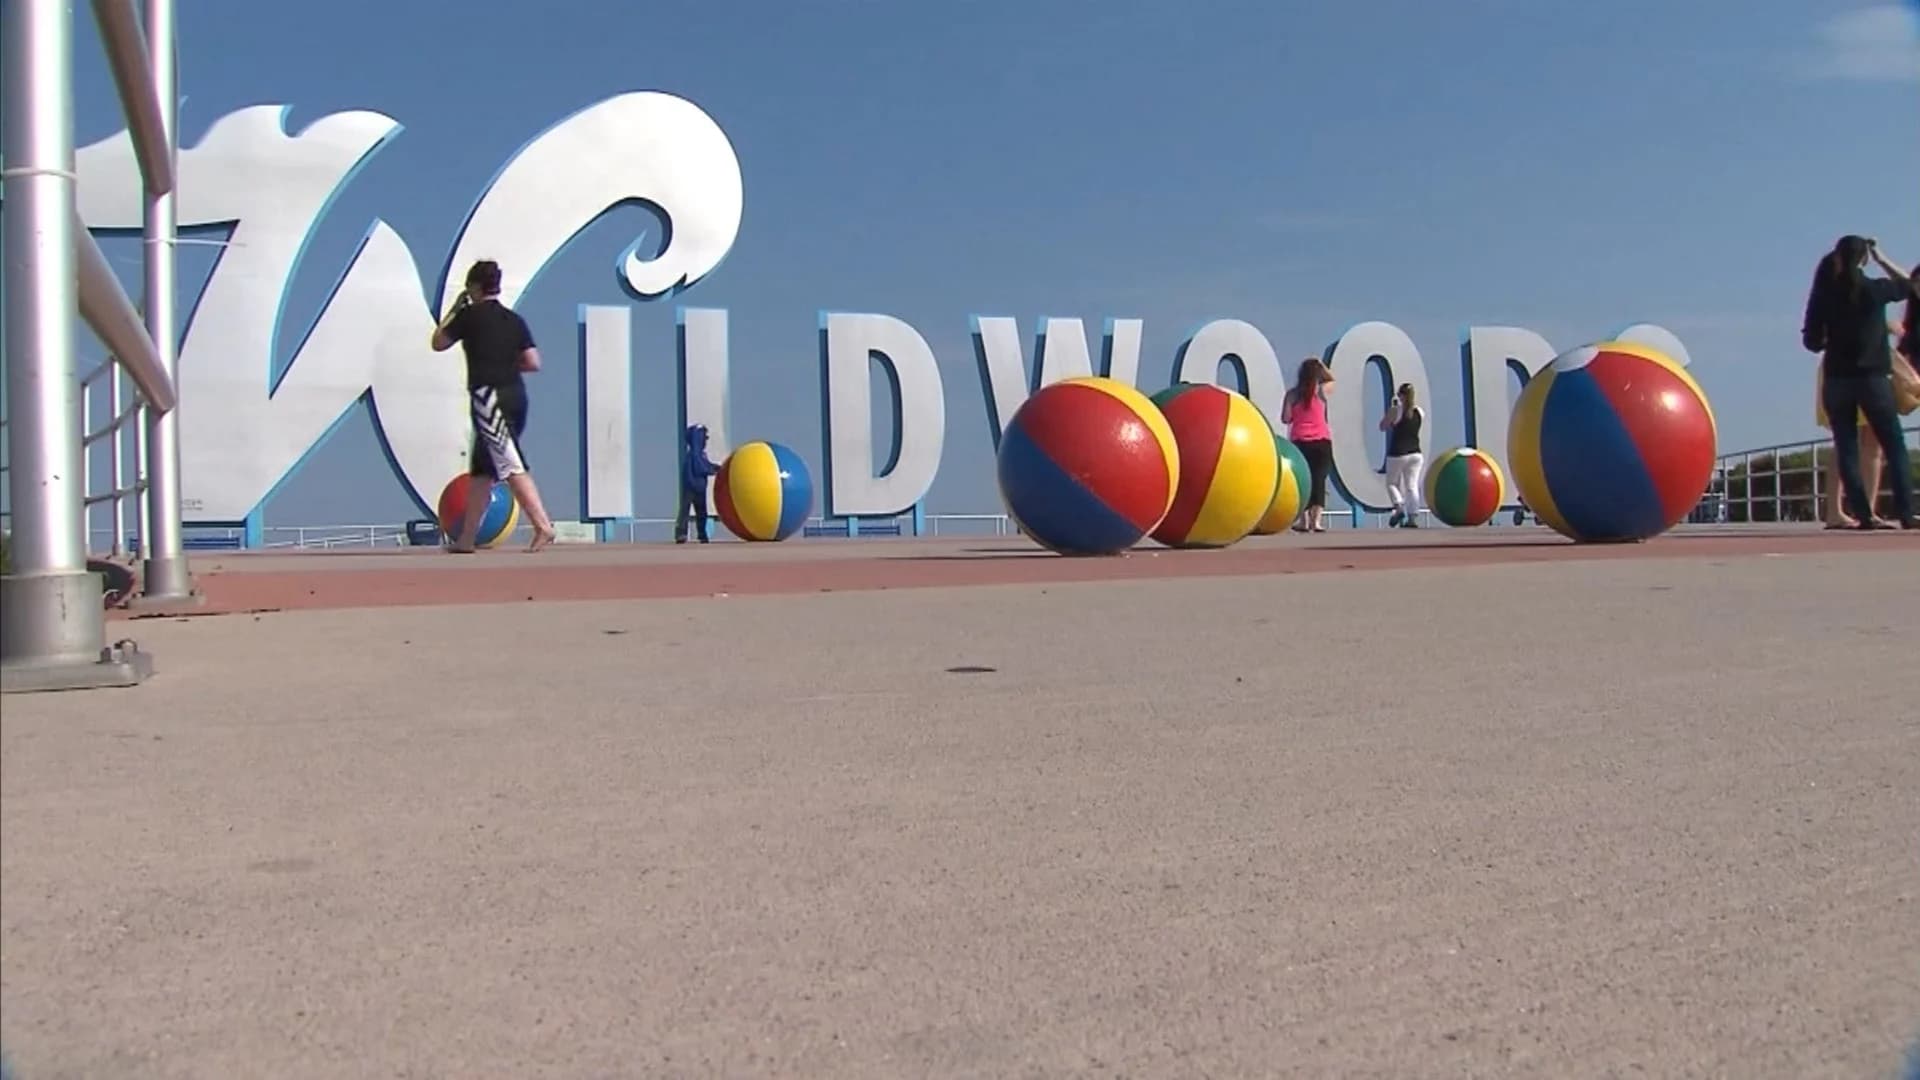 3-day country music festival coming to Wildwood announces another artist